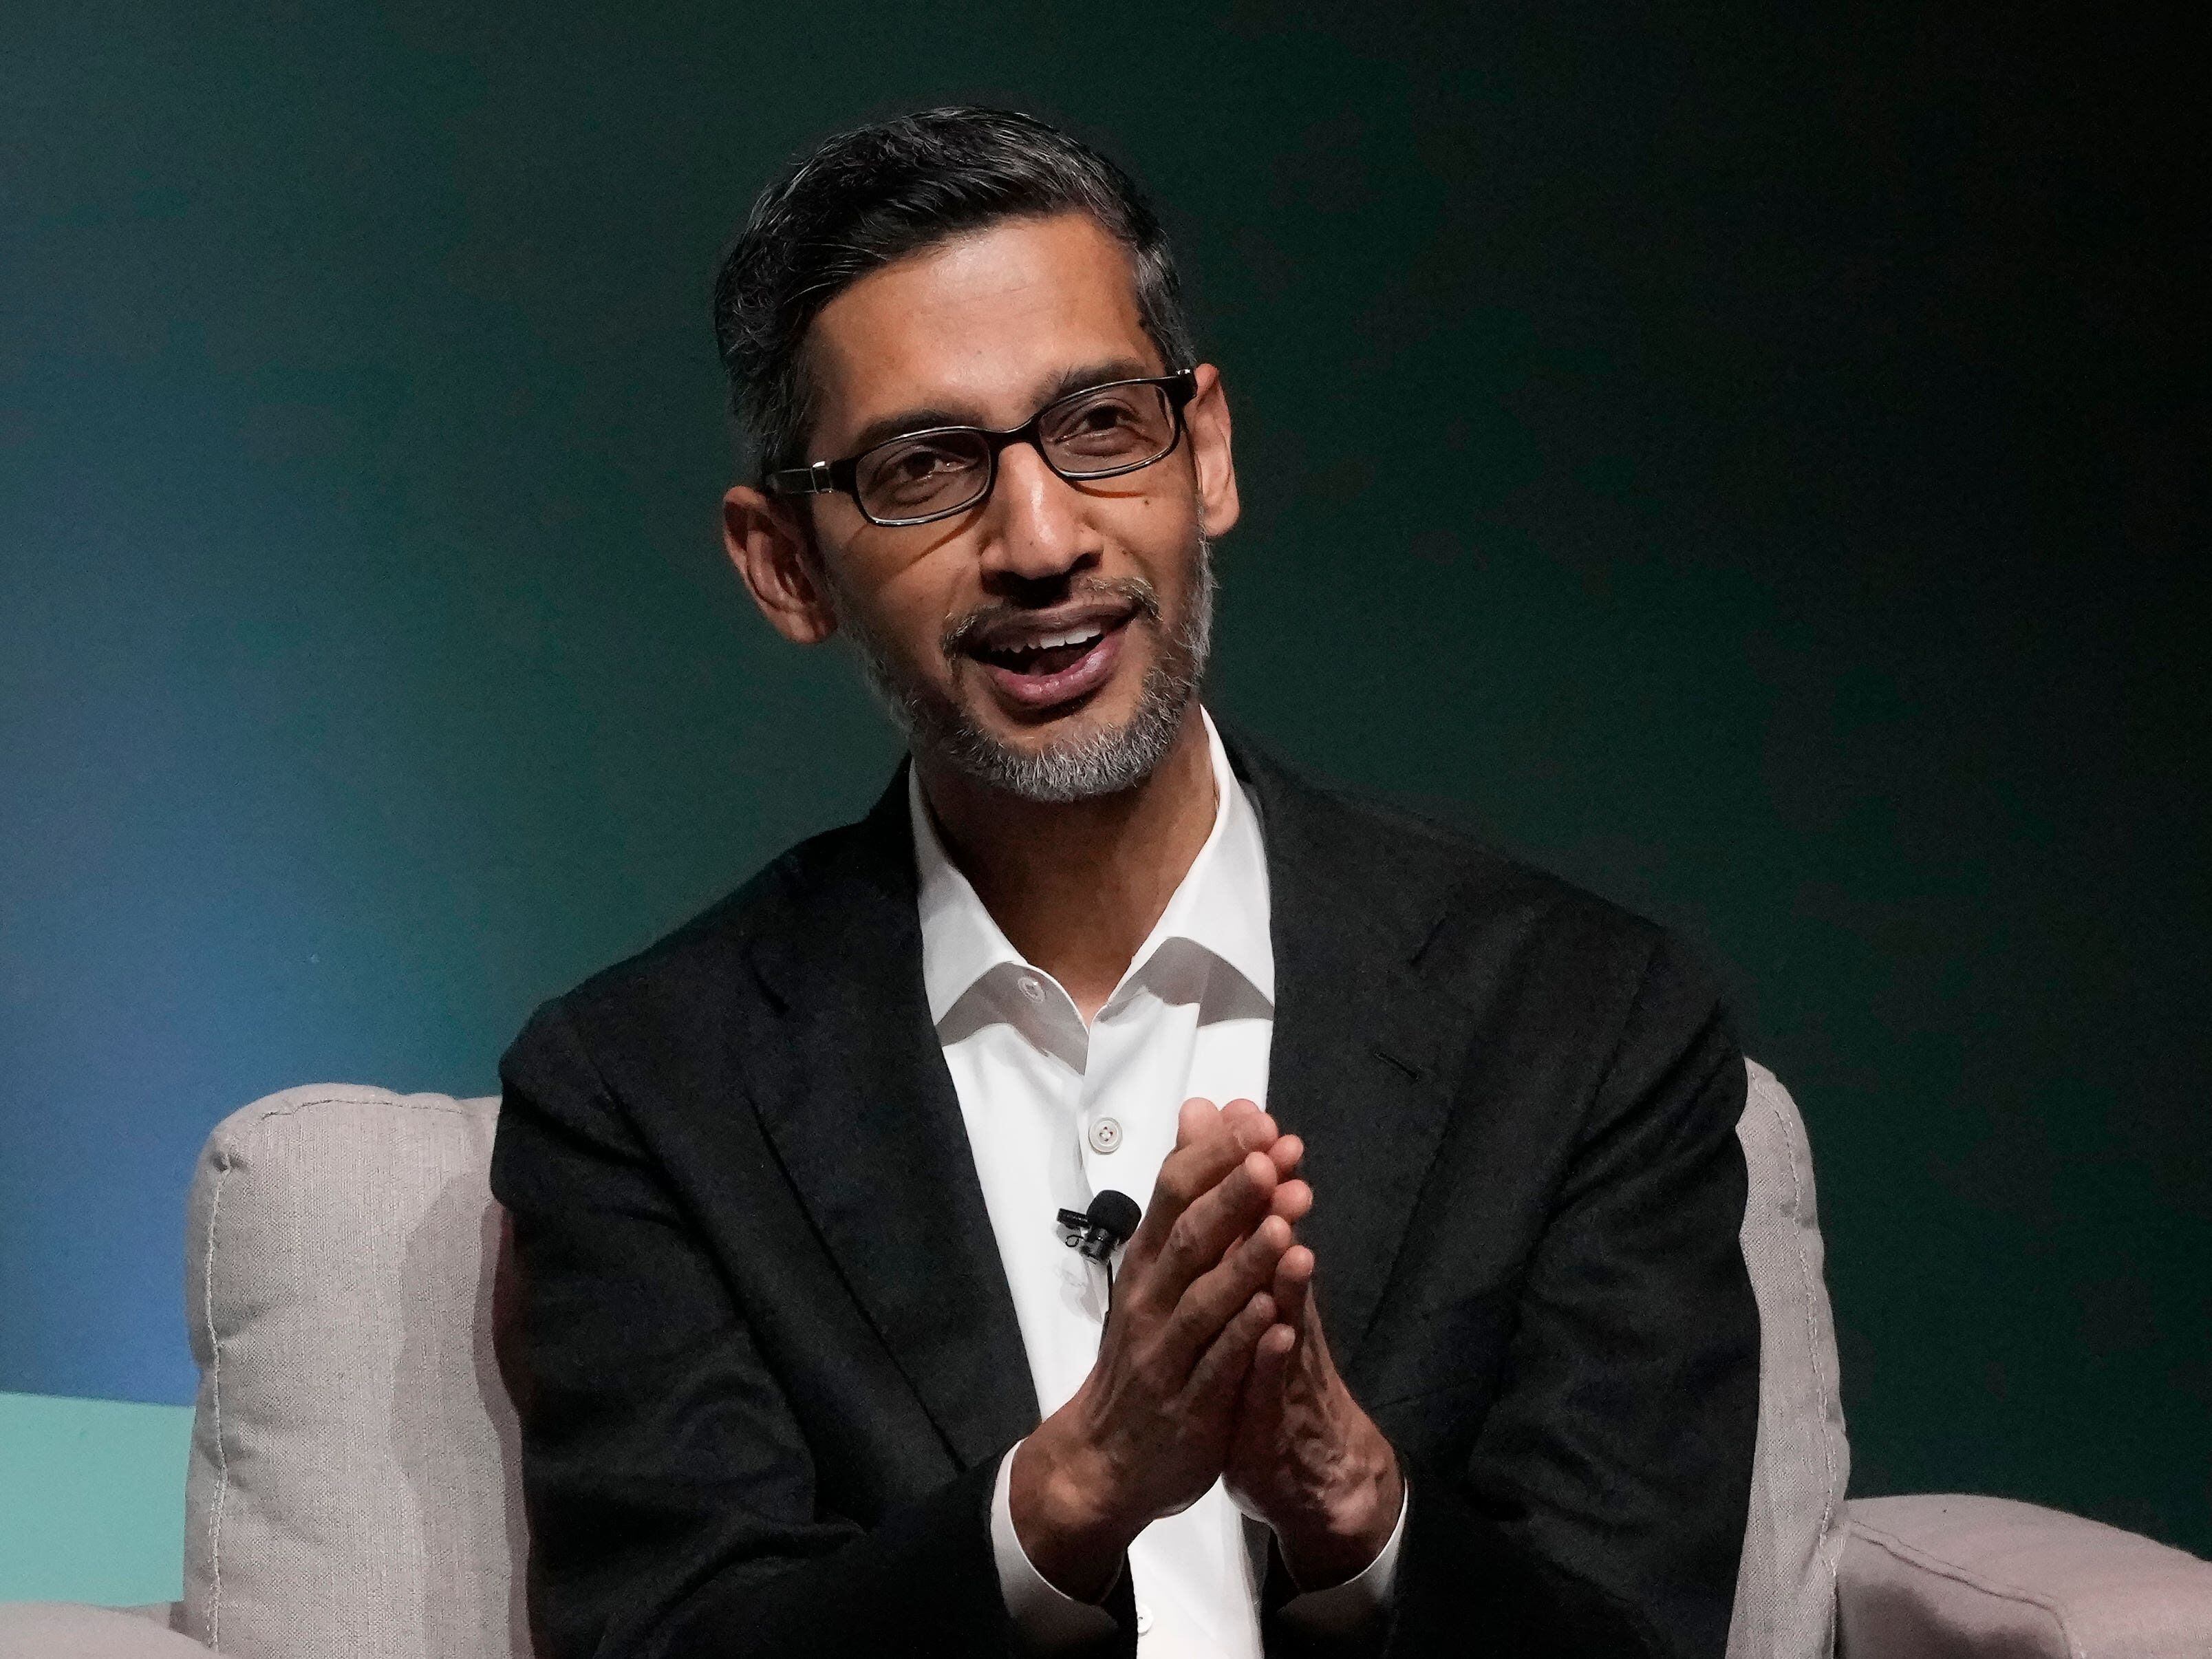 Tech CEOs Pichai, Altman, Nadella and others join US government AI safety board